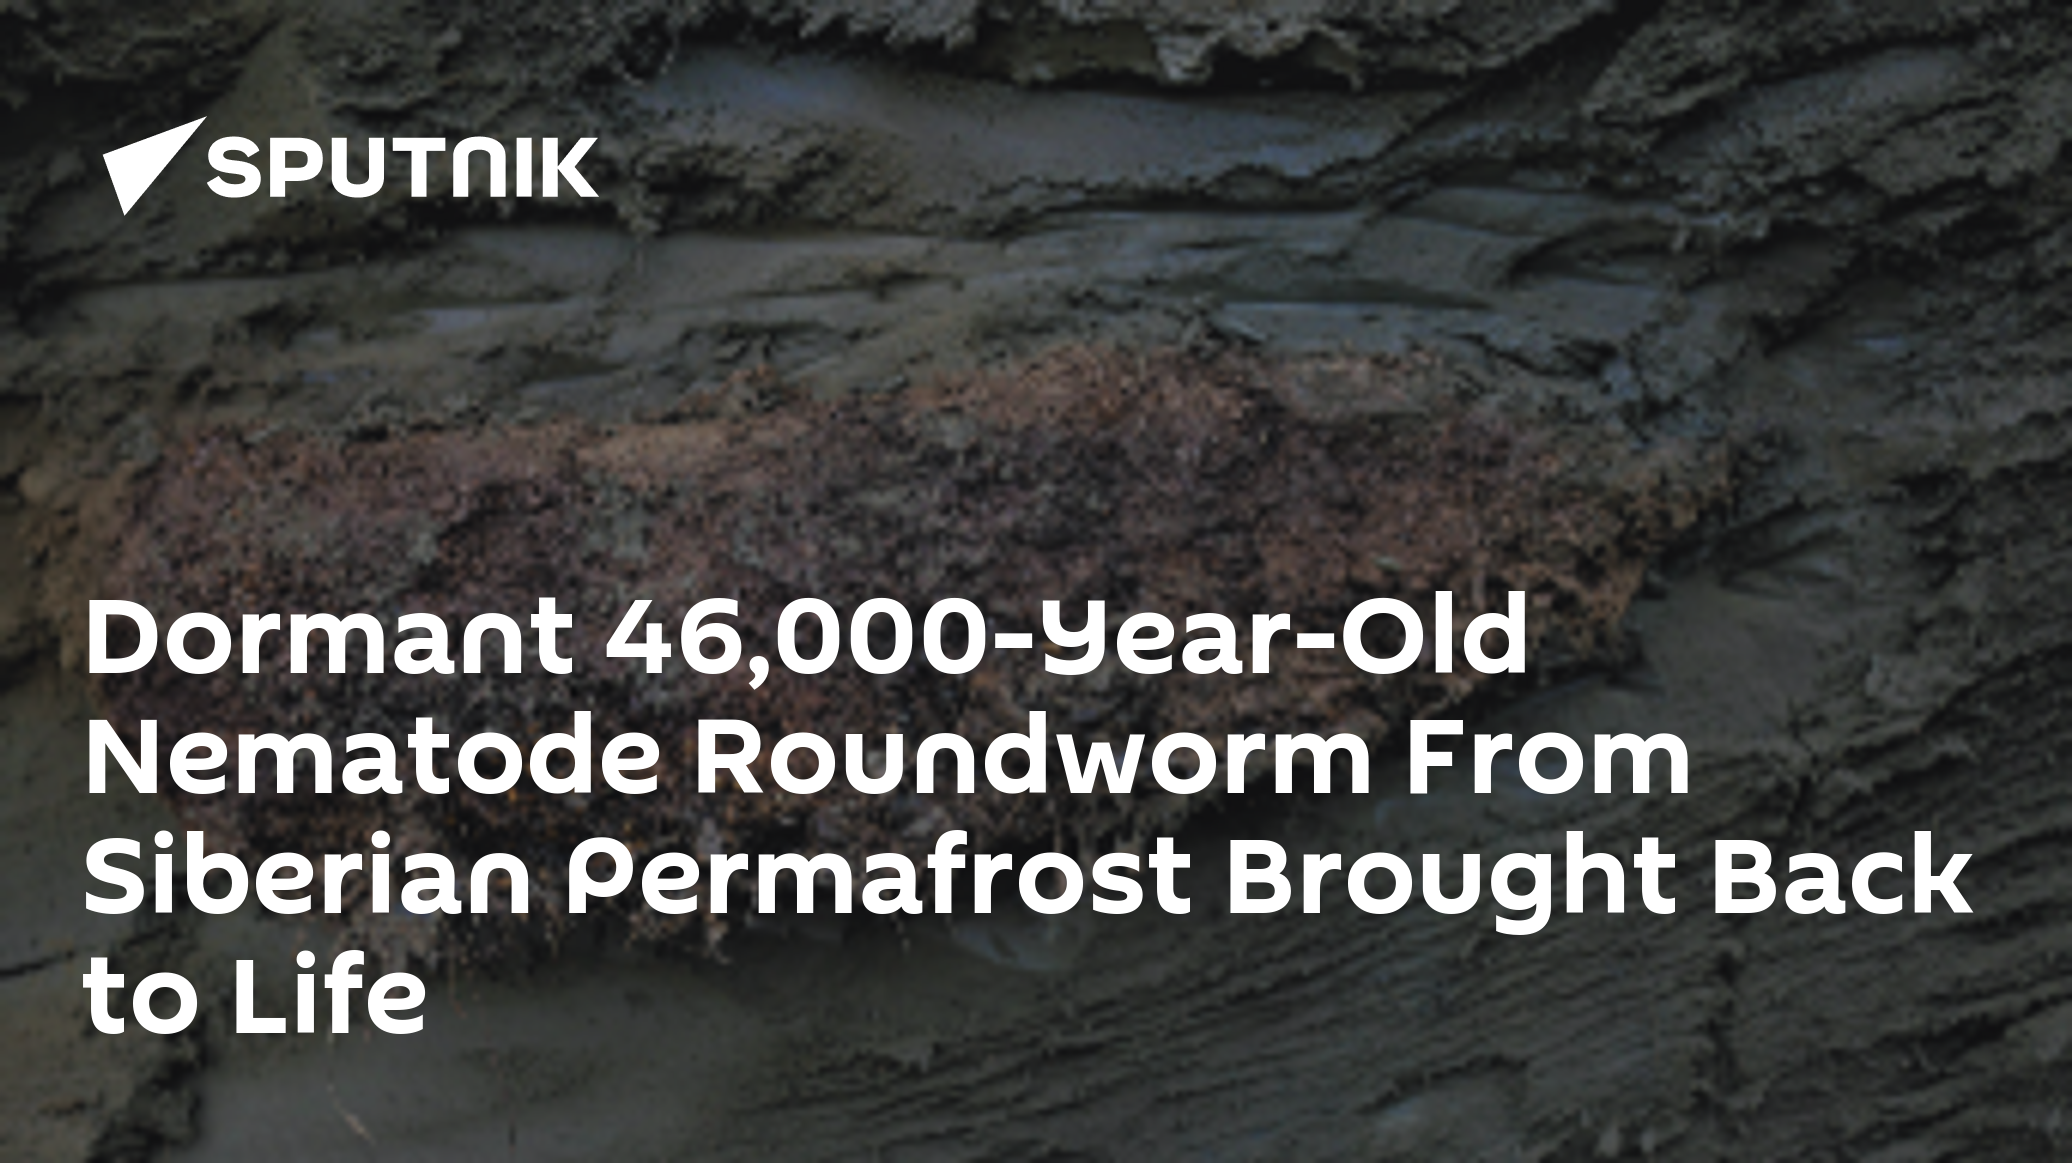 Have 46,000-year-old Nematodes in Suspended Animation Really Been  Resuscitated?